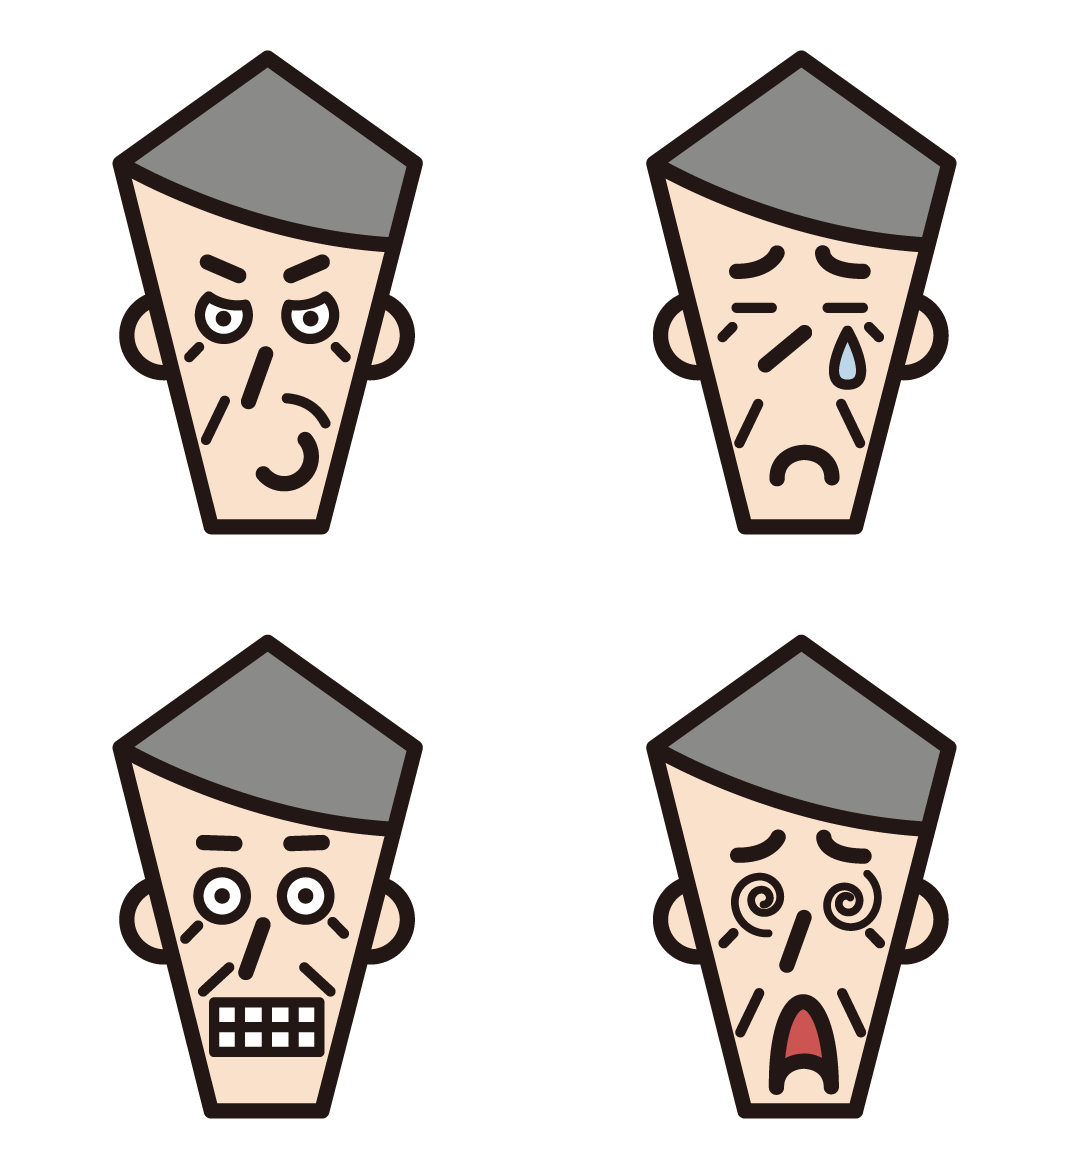 3 illustrations of the various expressions of the old man